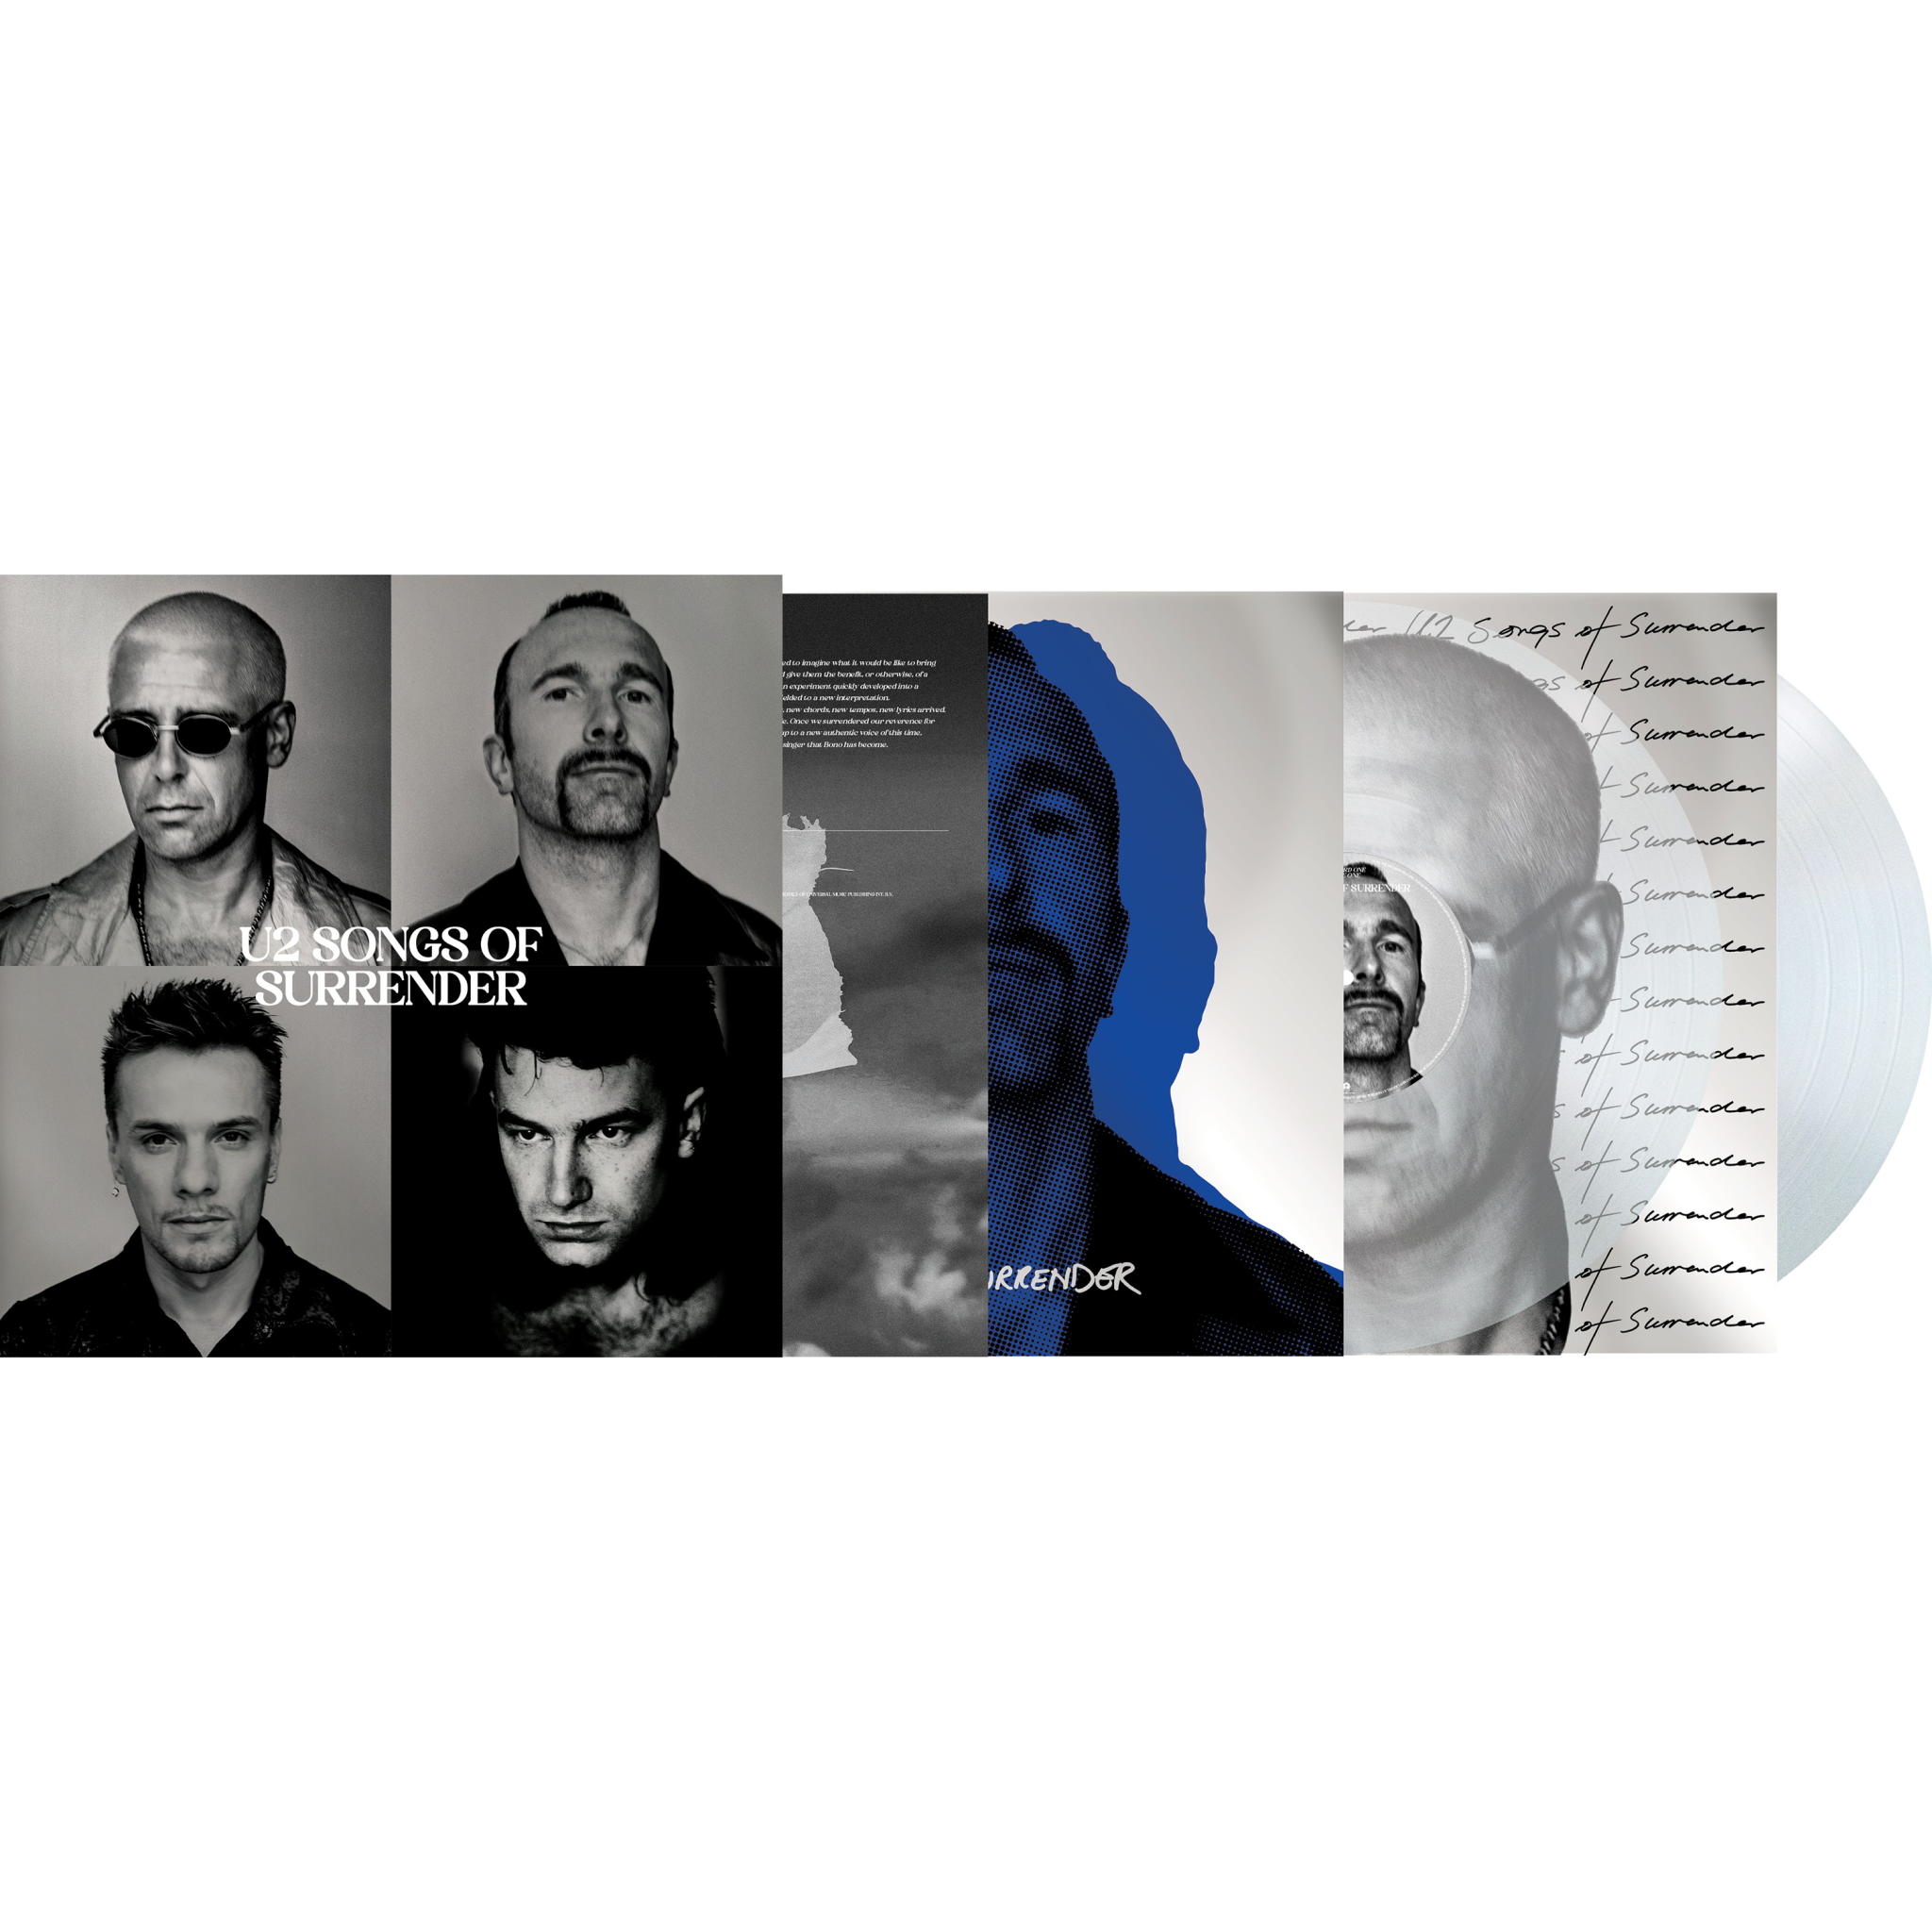 U2 - ‘Songs Of Surrender’ – 2LP Exclusive Deluxe Crystal Clear Vinyl (Limited Edition)